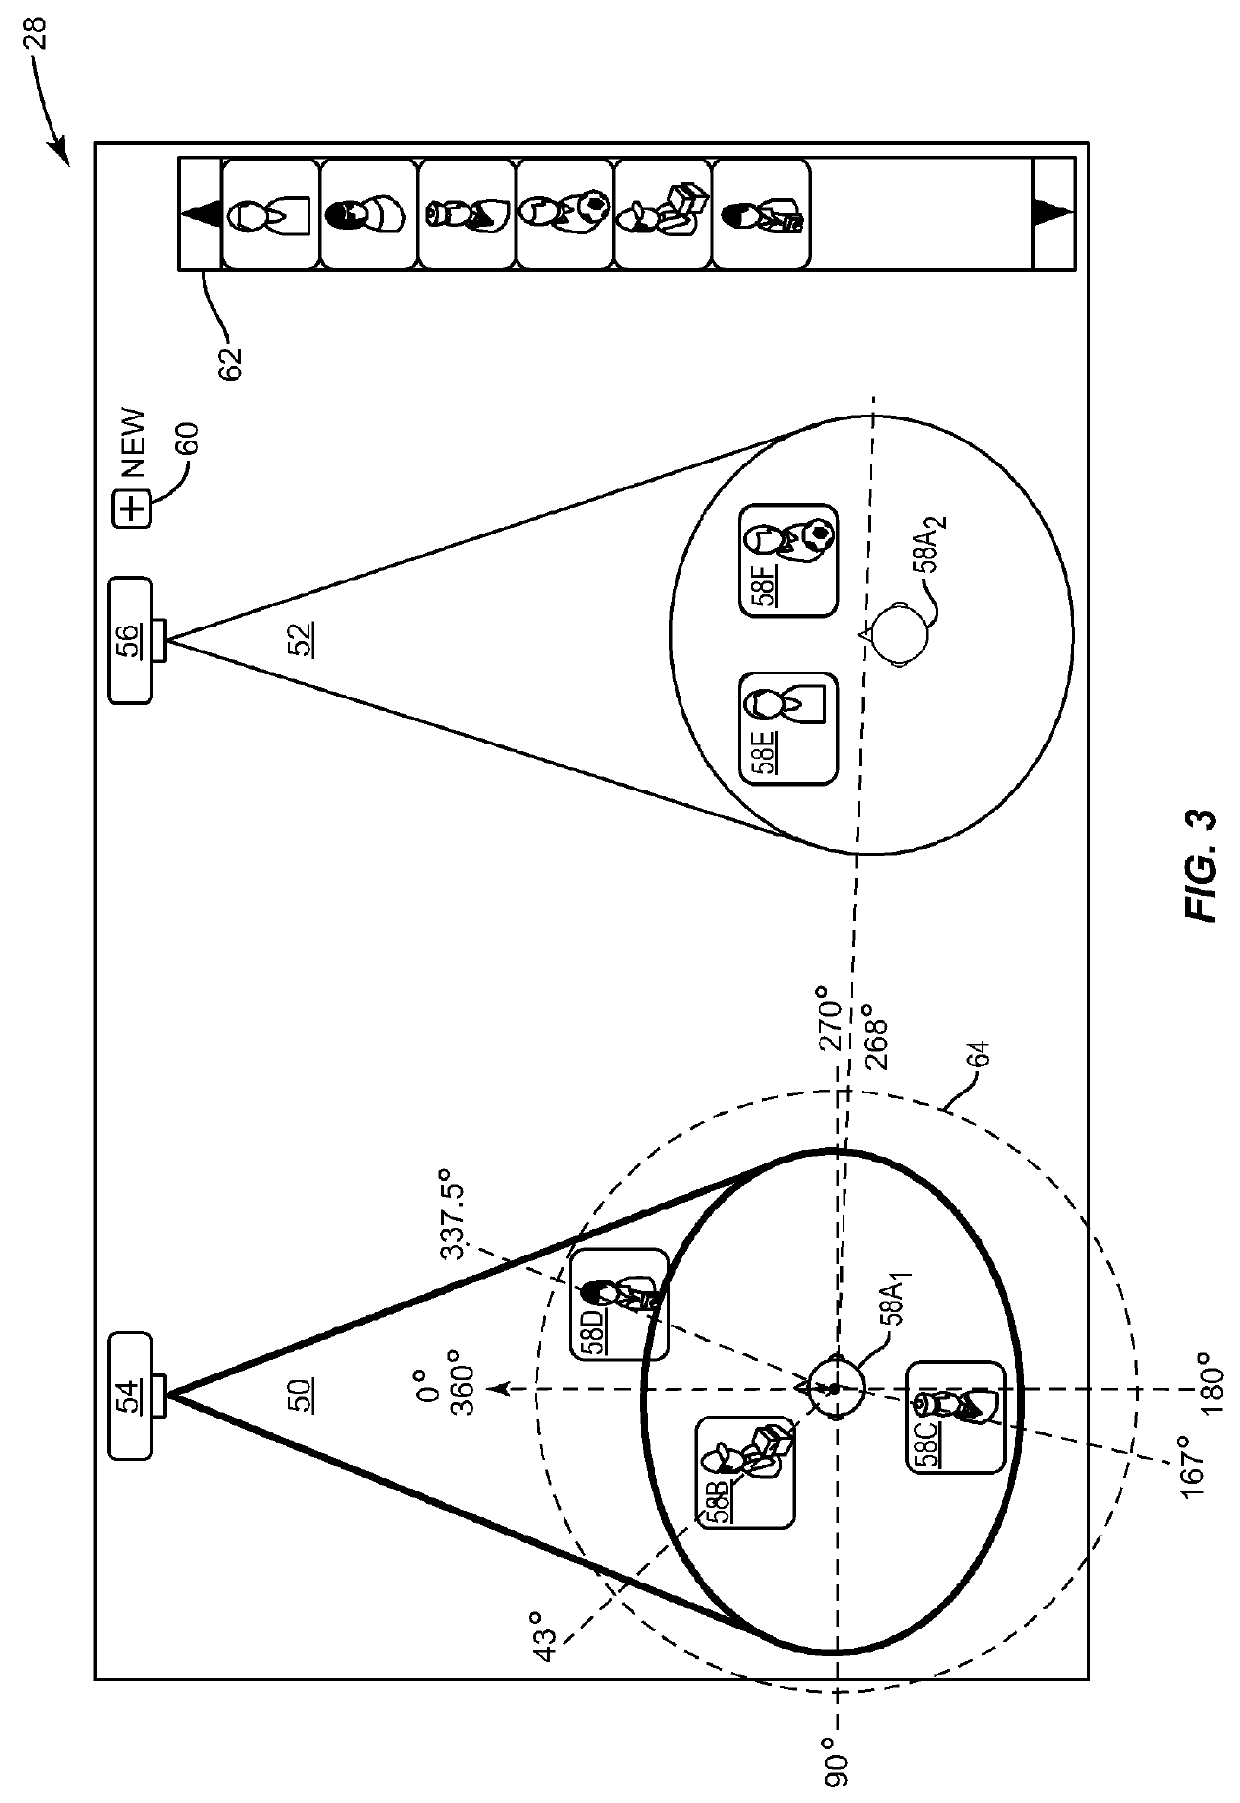 Method and system for controlling audio signals in multiple concurrent conference calls